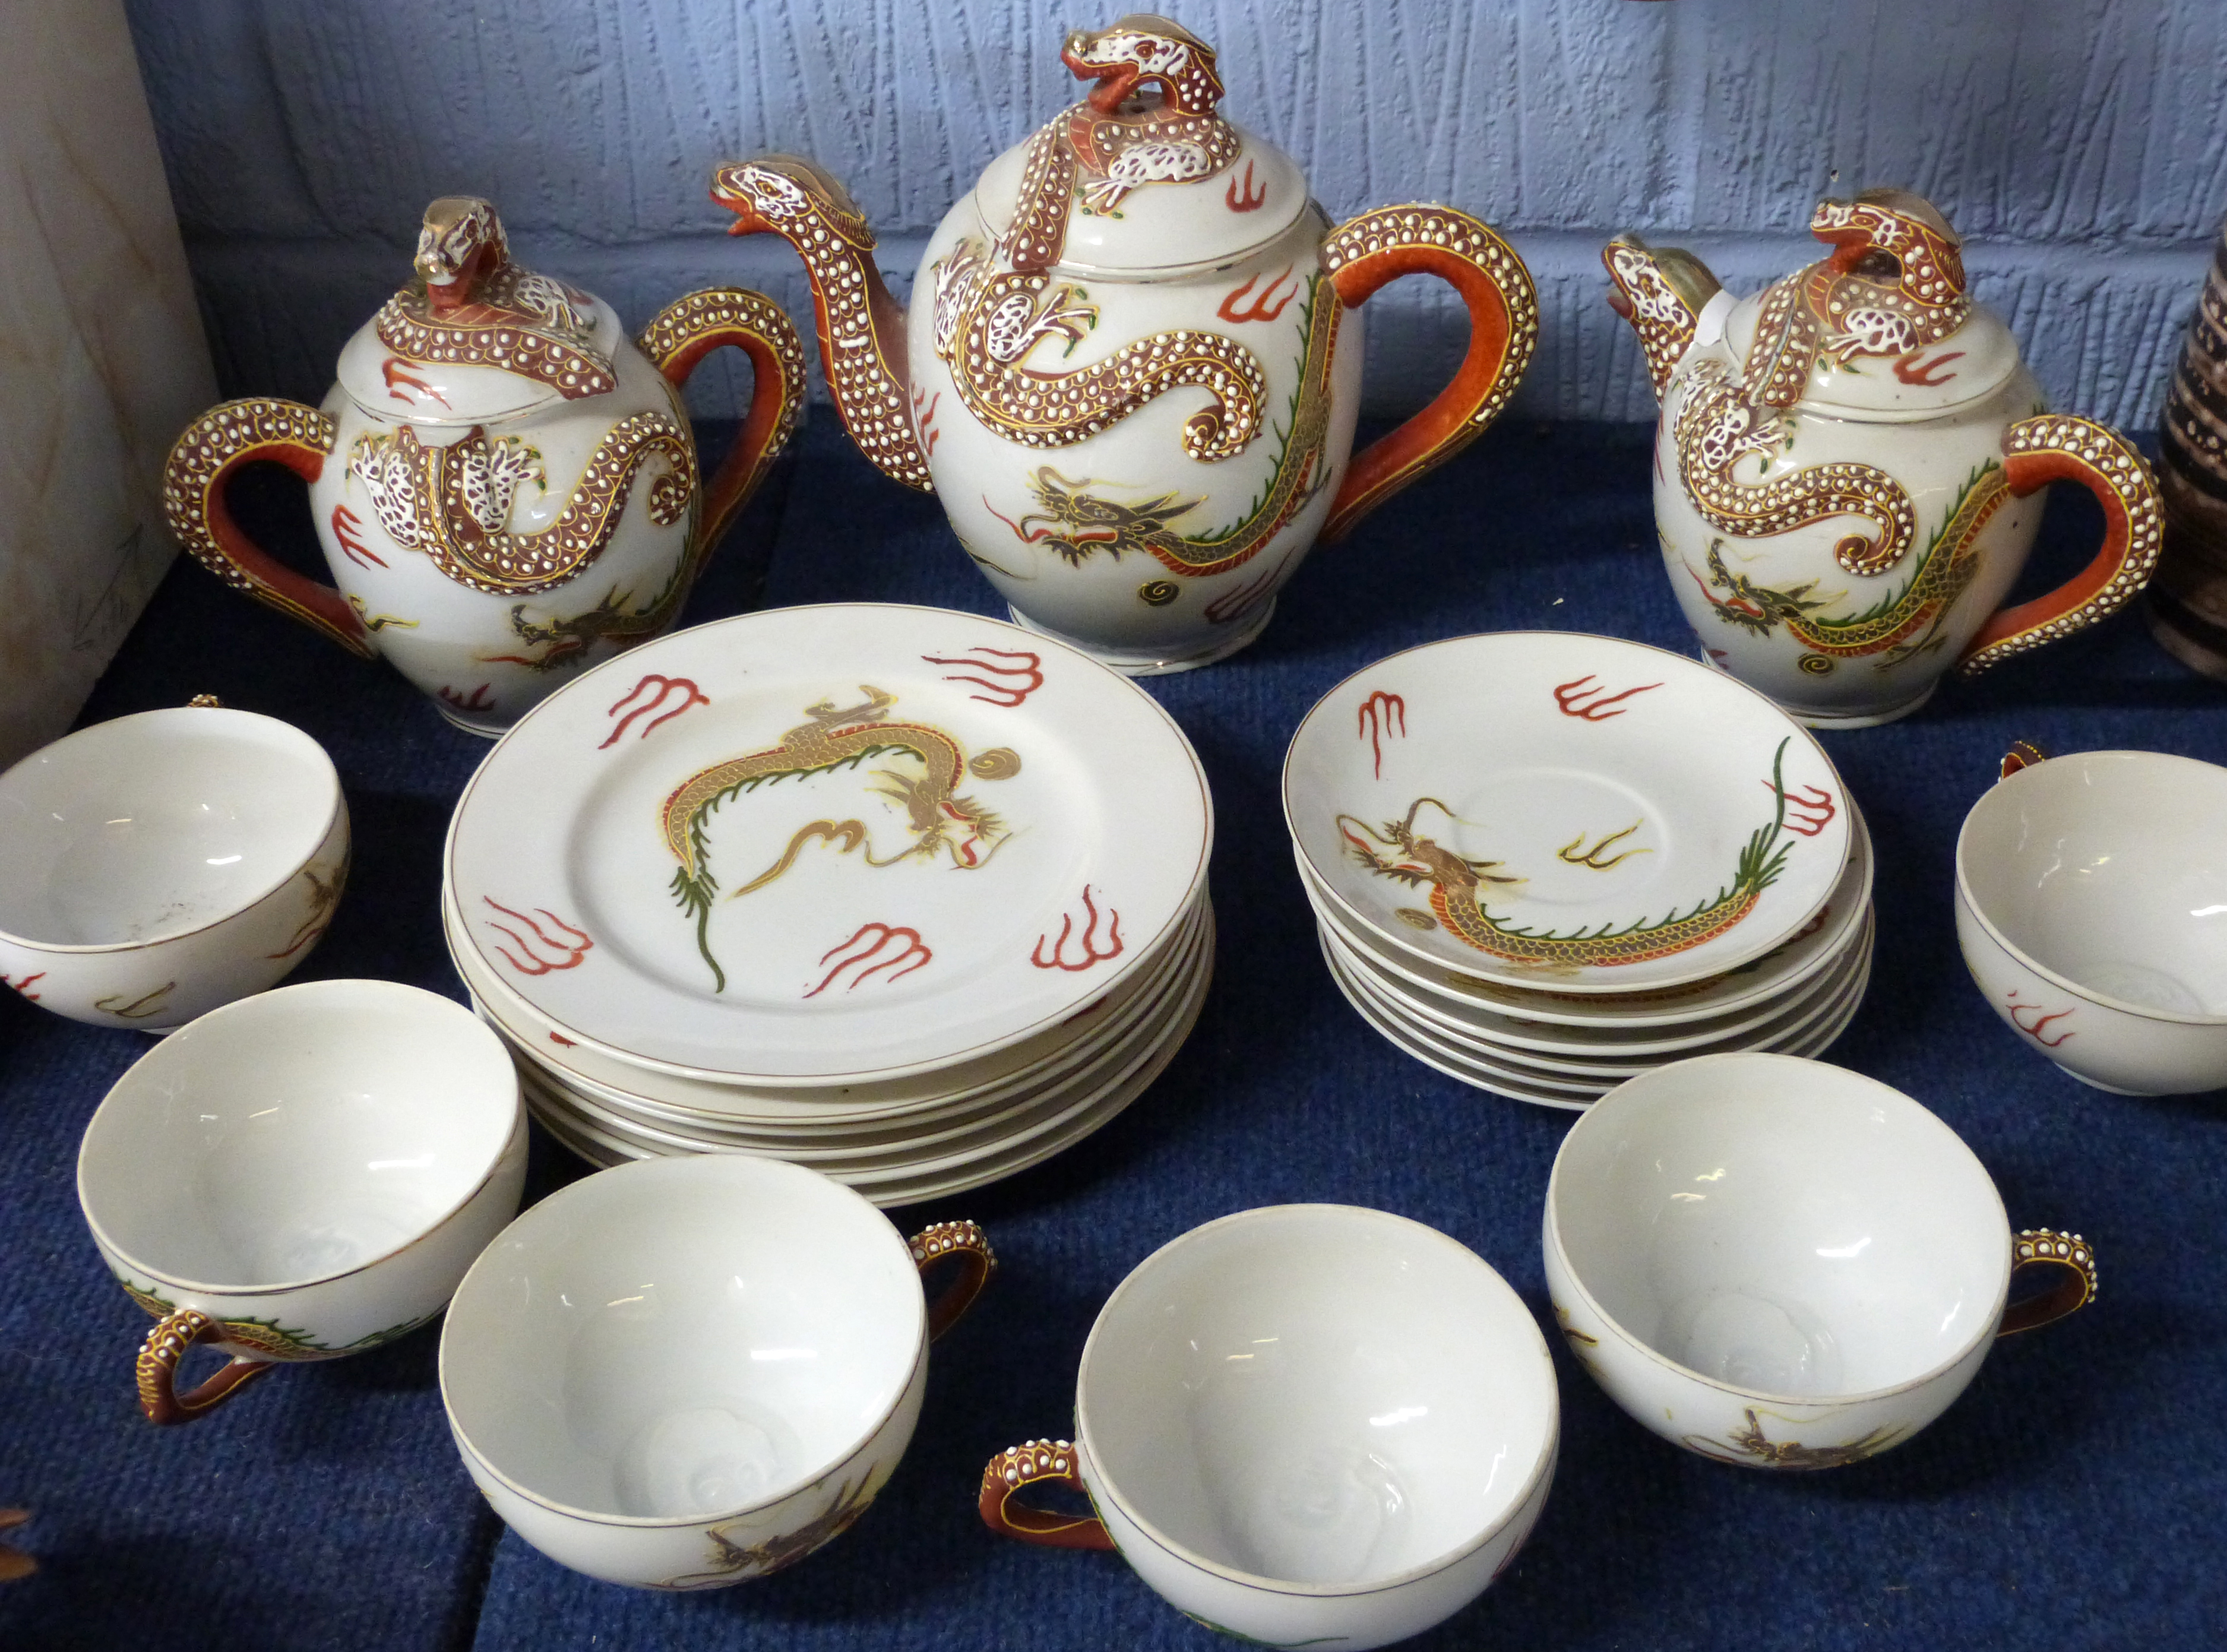 Mid-20th century Japanese porcelain tea set, the cups with a lithophane of a geisha girl in the